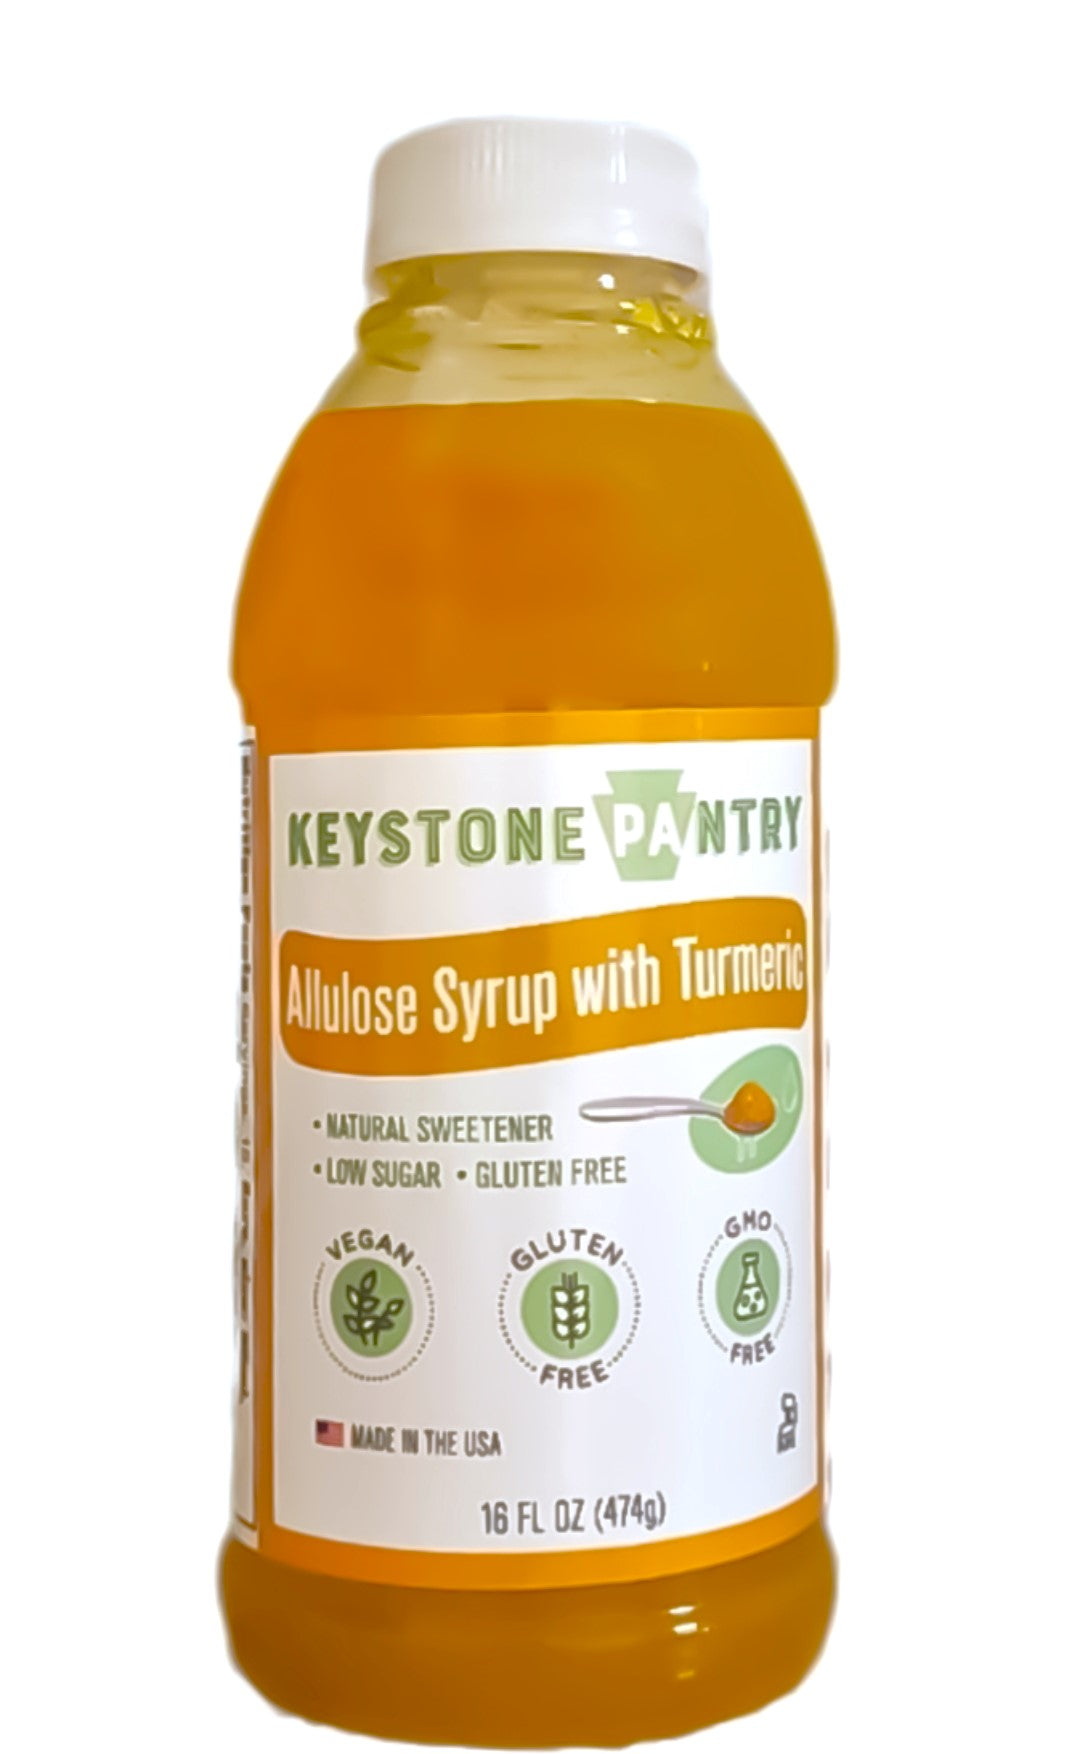 eystone Pantry Allulose Syrup with Tumeric Natural Sweetener Healthy Option